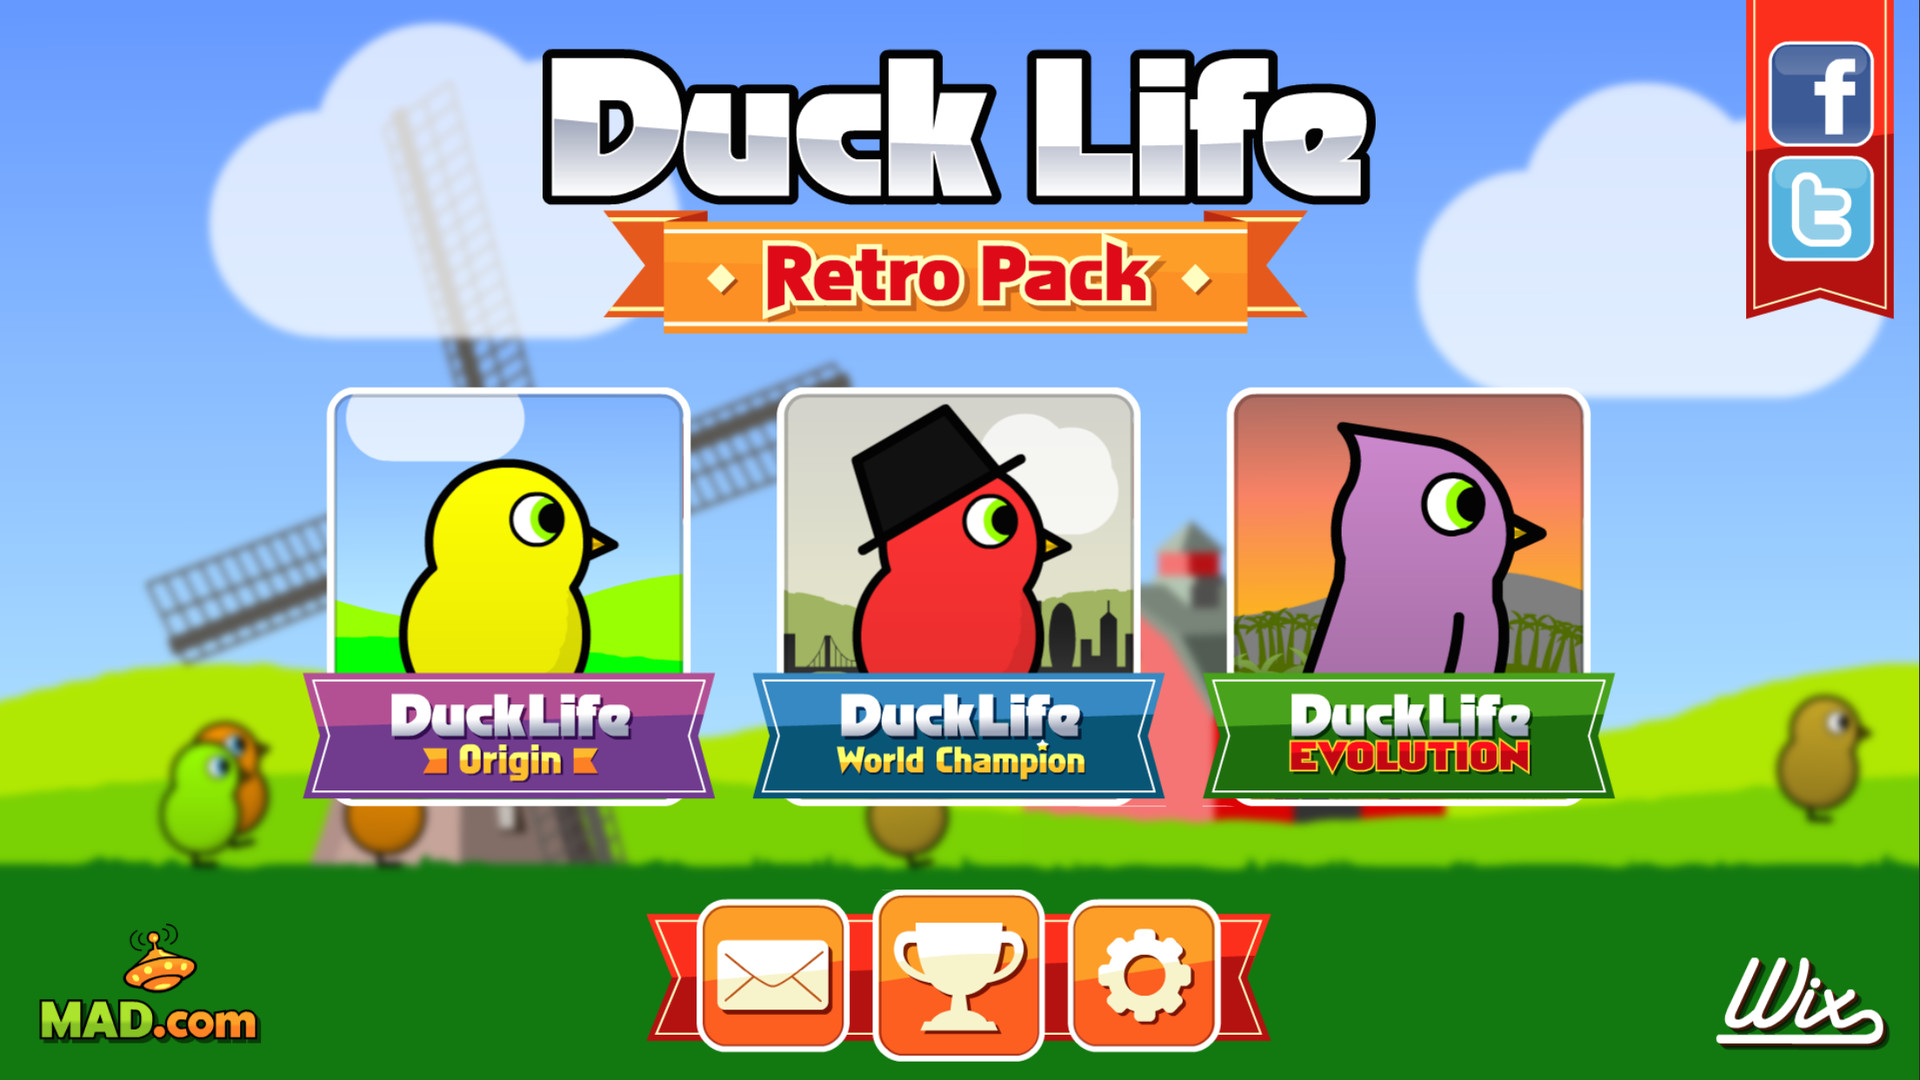 Duck Life: Retro Pack - SteamSpy - All the data and stats about